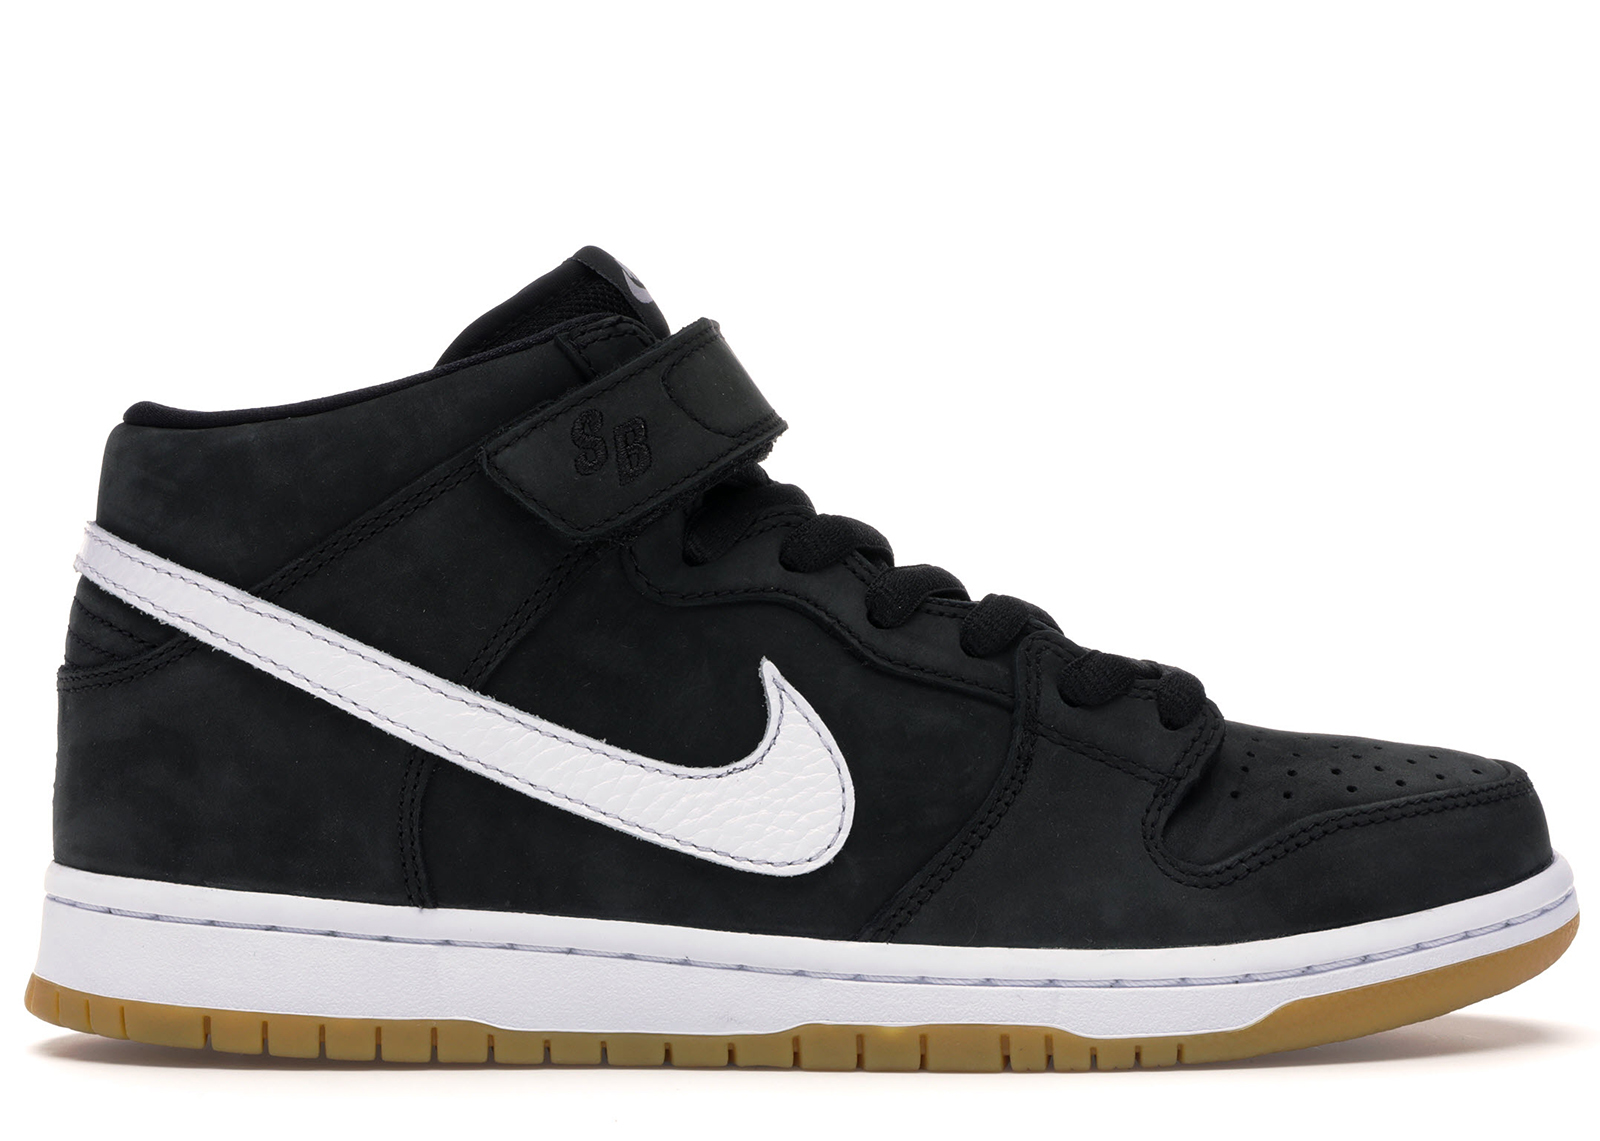 Buy Nike SB SB Dunk Mid Shoes & New Sneakers - StockX